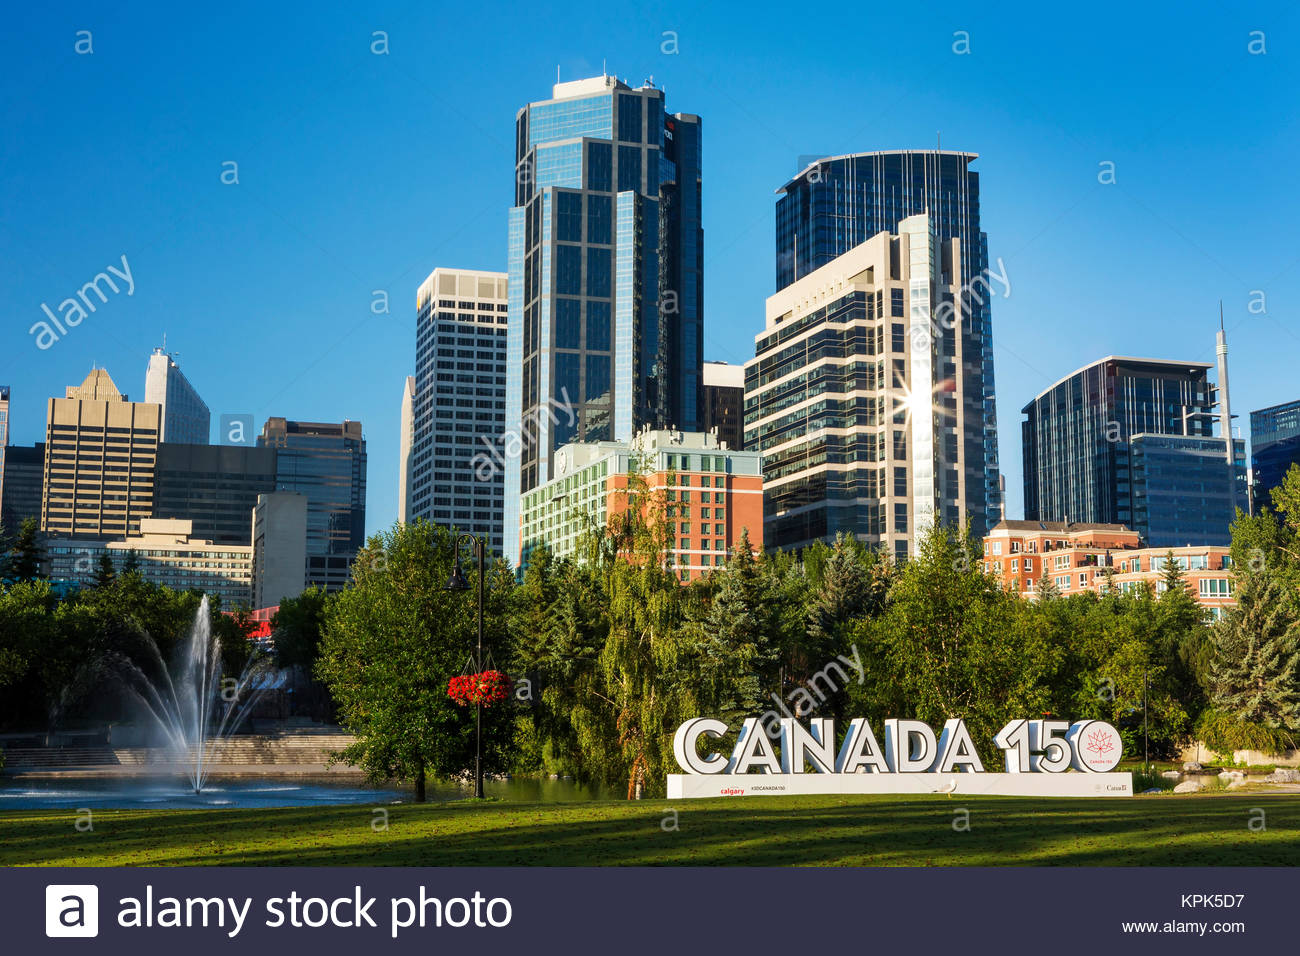 Canada 150 signage in city park with Calgary building towers in